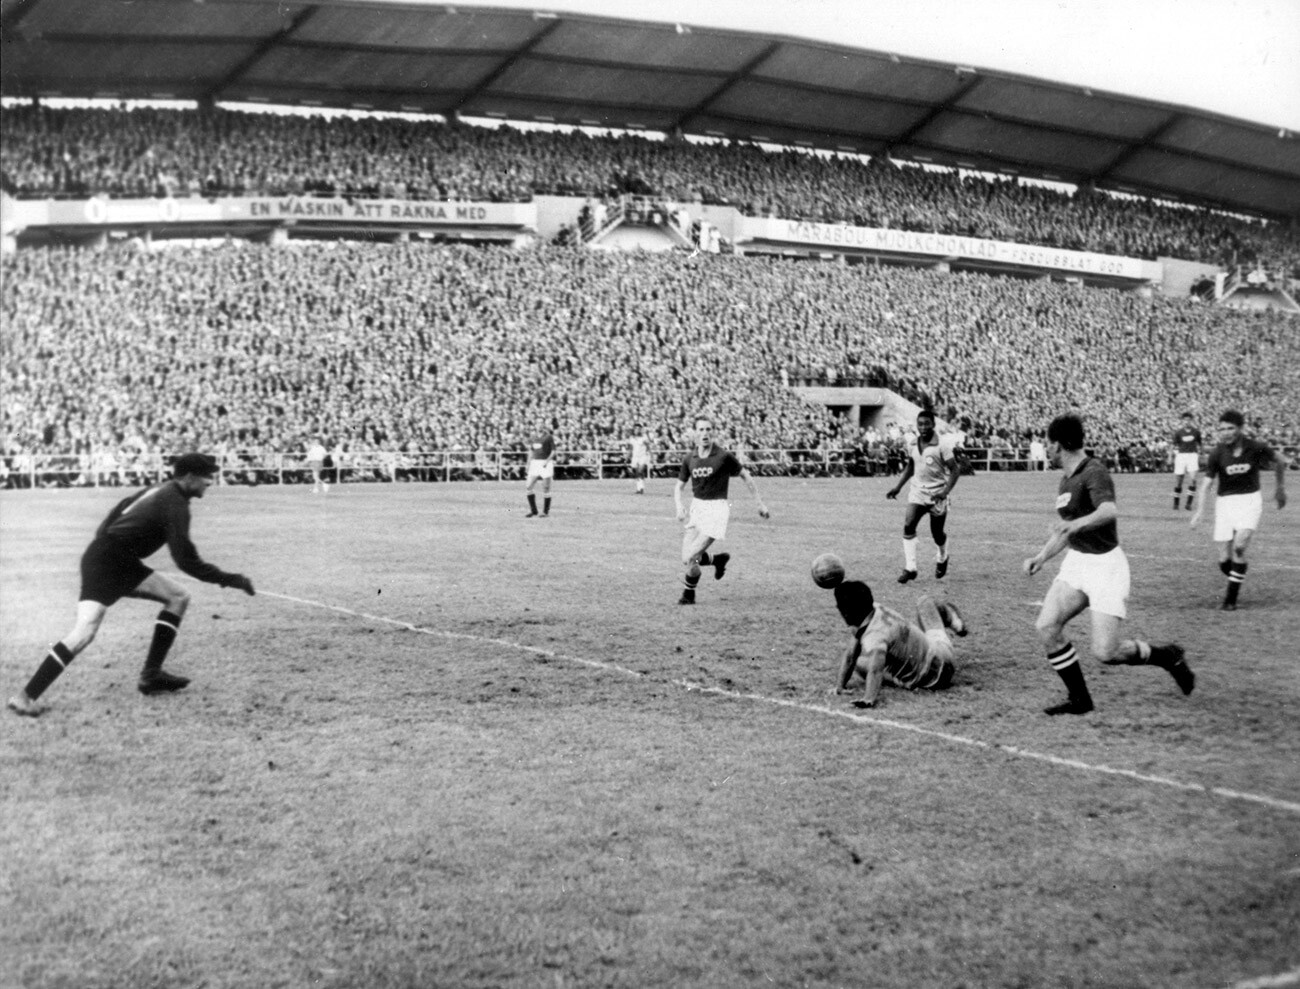 The 1958 FIFA World Cup group match between Brazil and the Soviet Union.